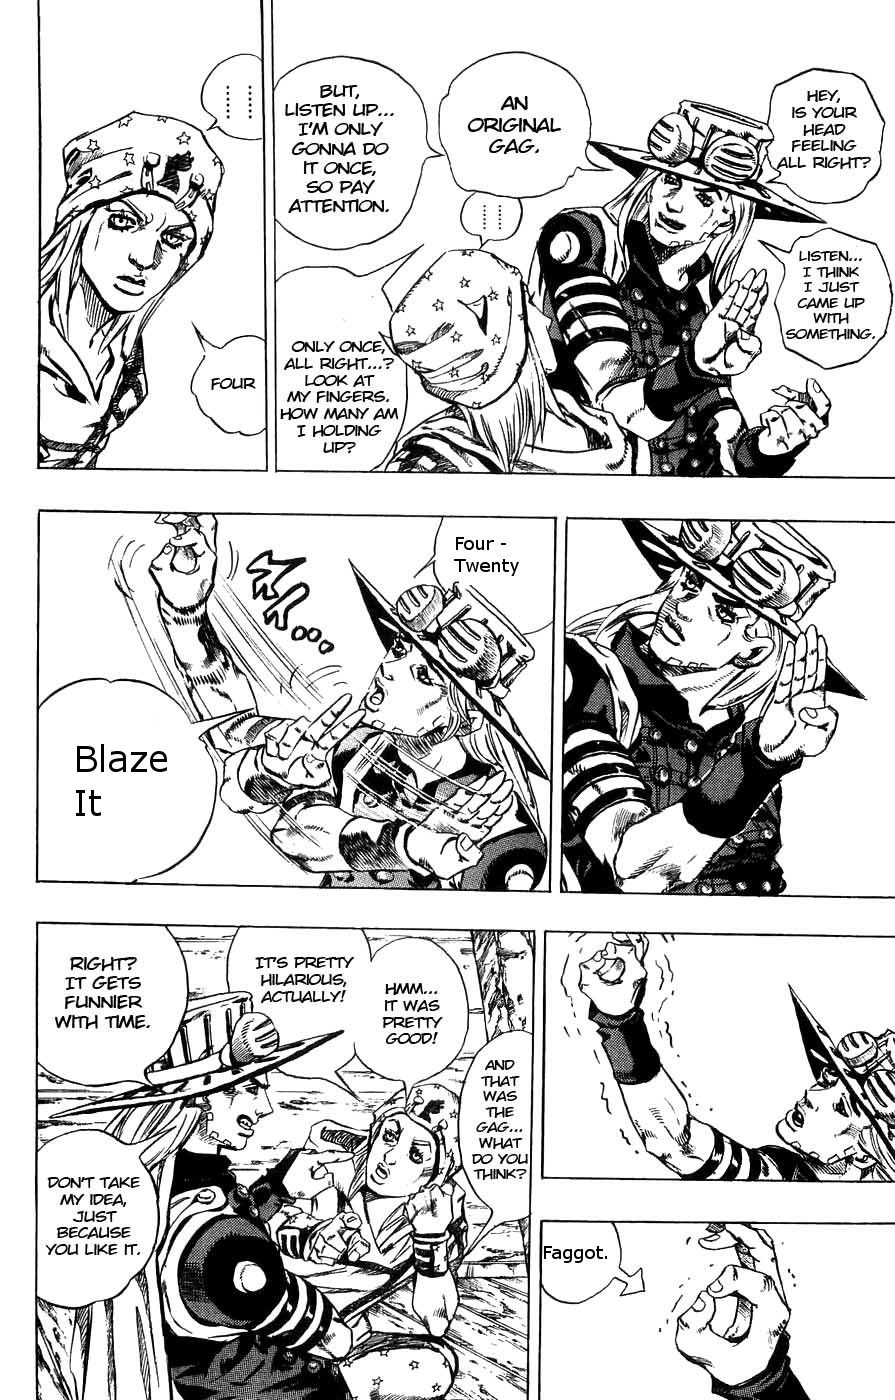 Johnny Joestar sarcastically compliments Gyro's outdated dank meme